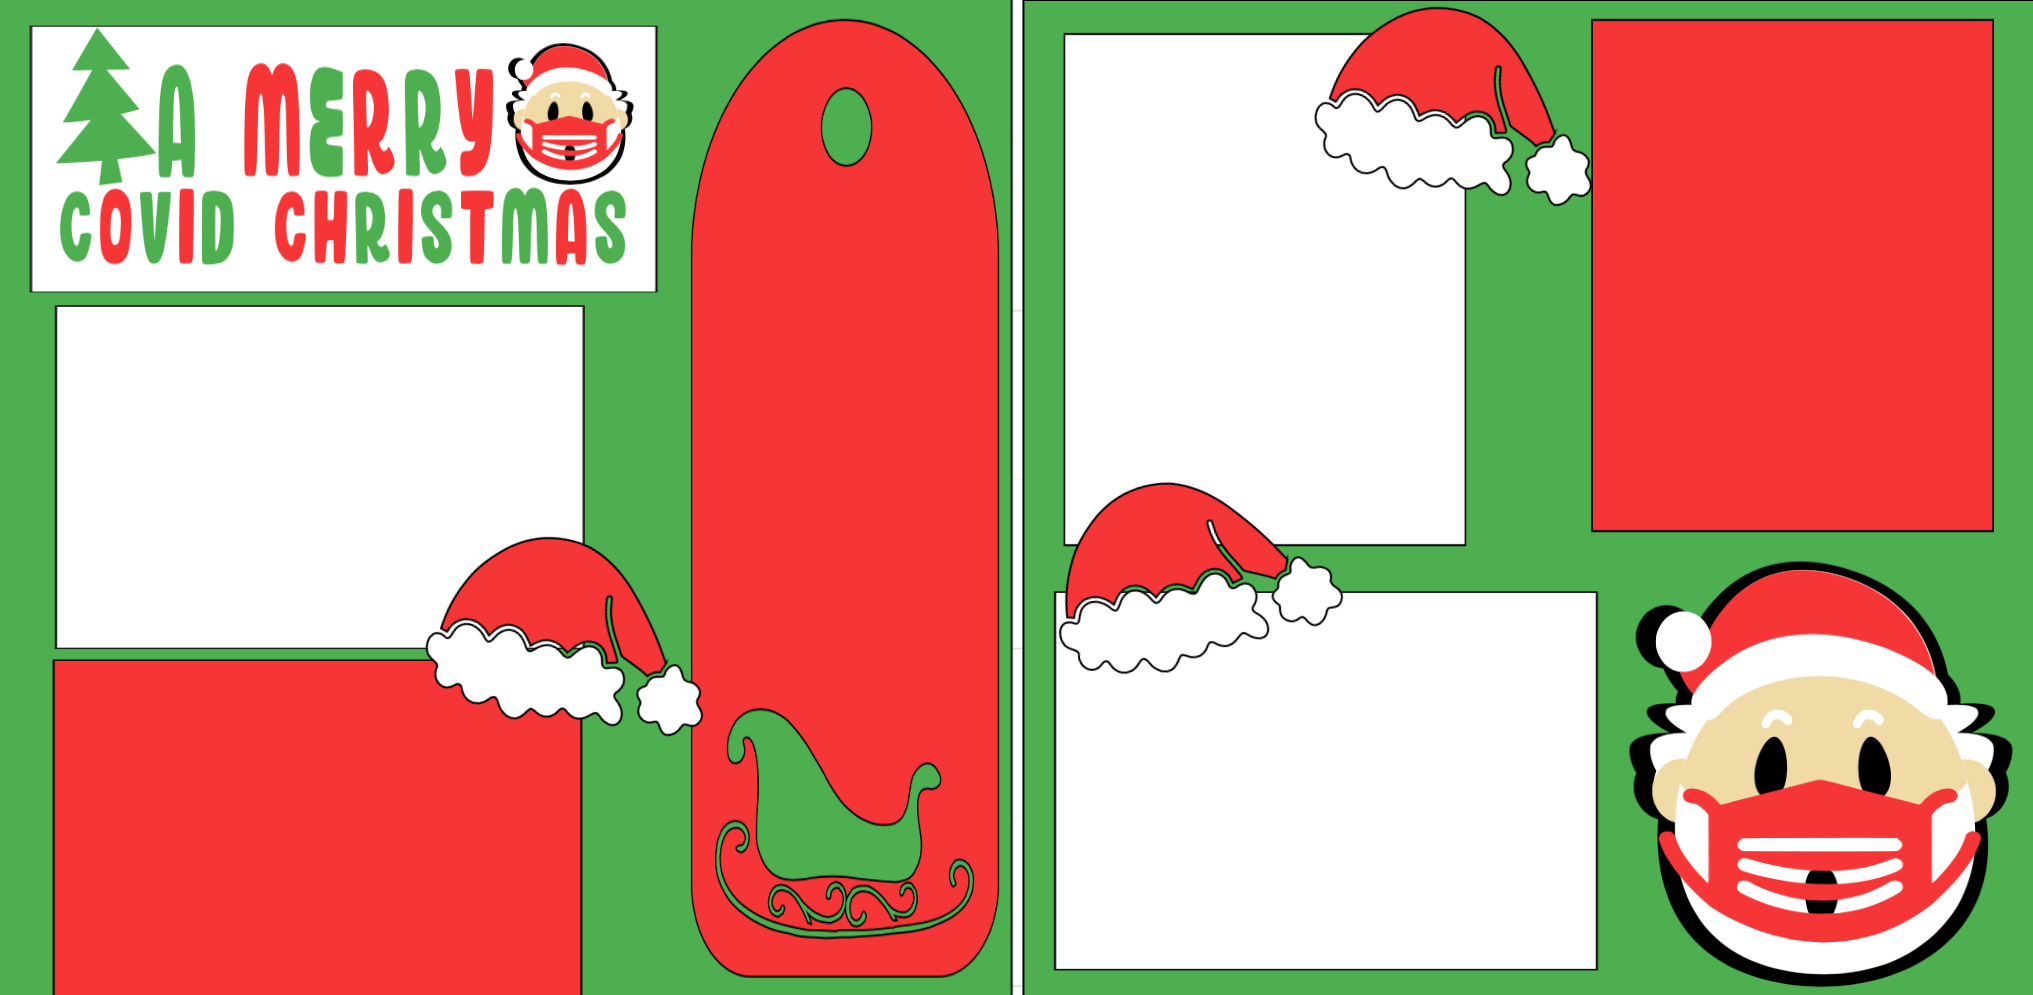 Merry COVID Christmas   page kit